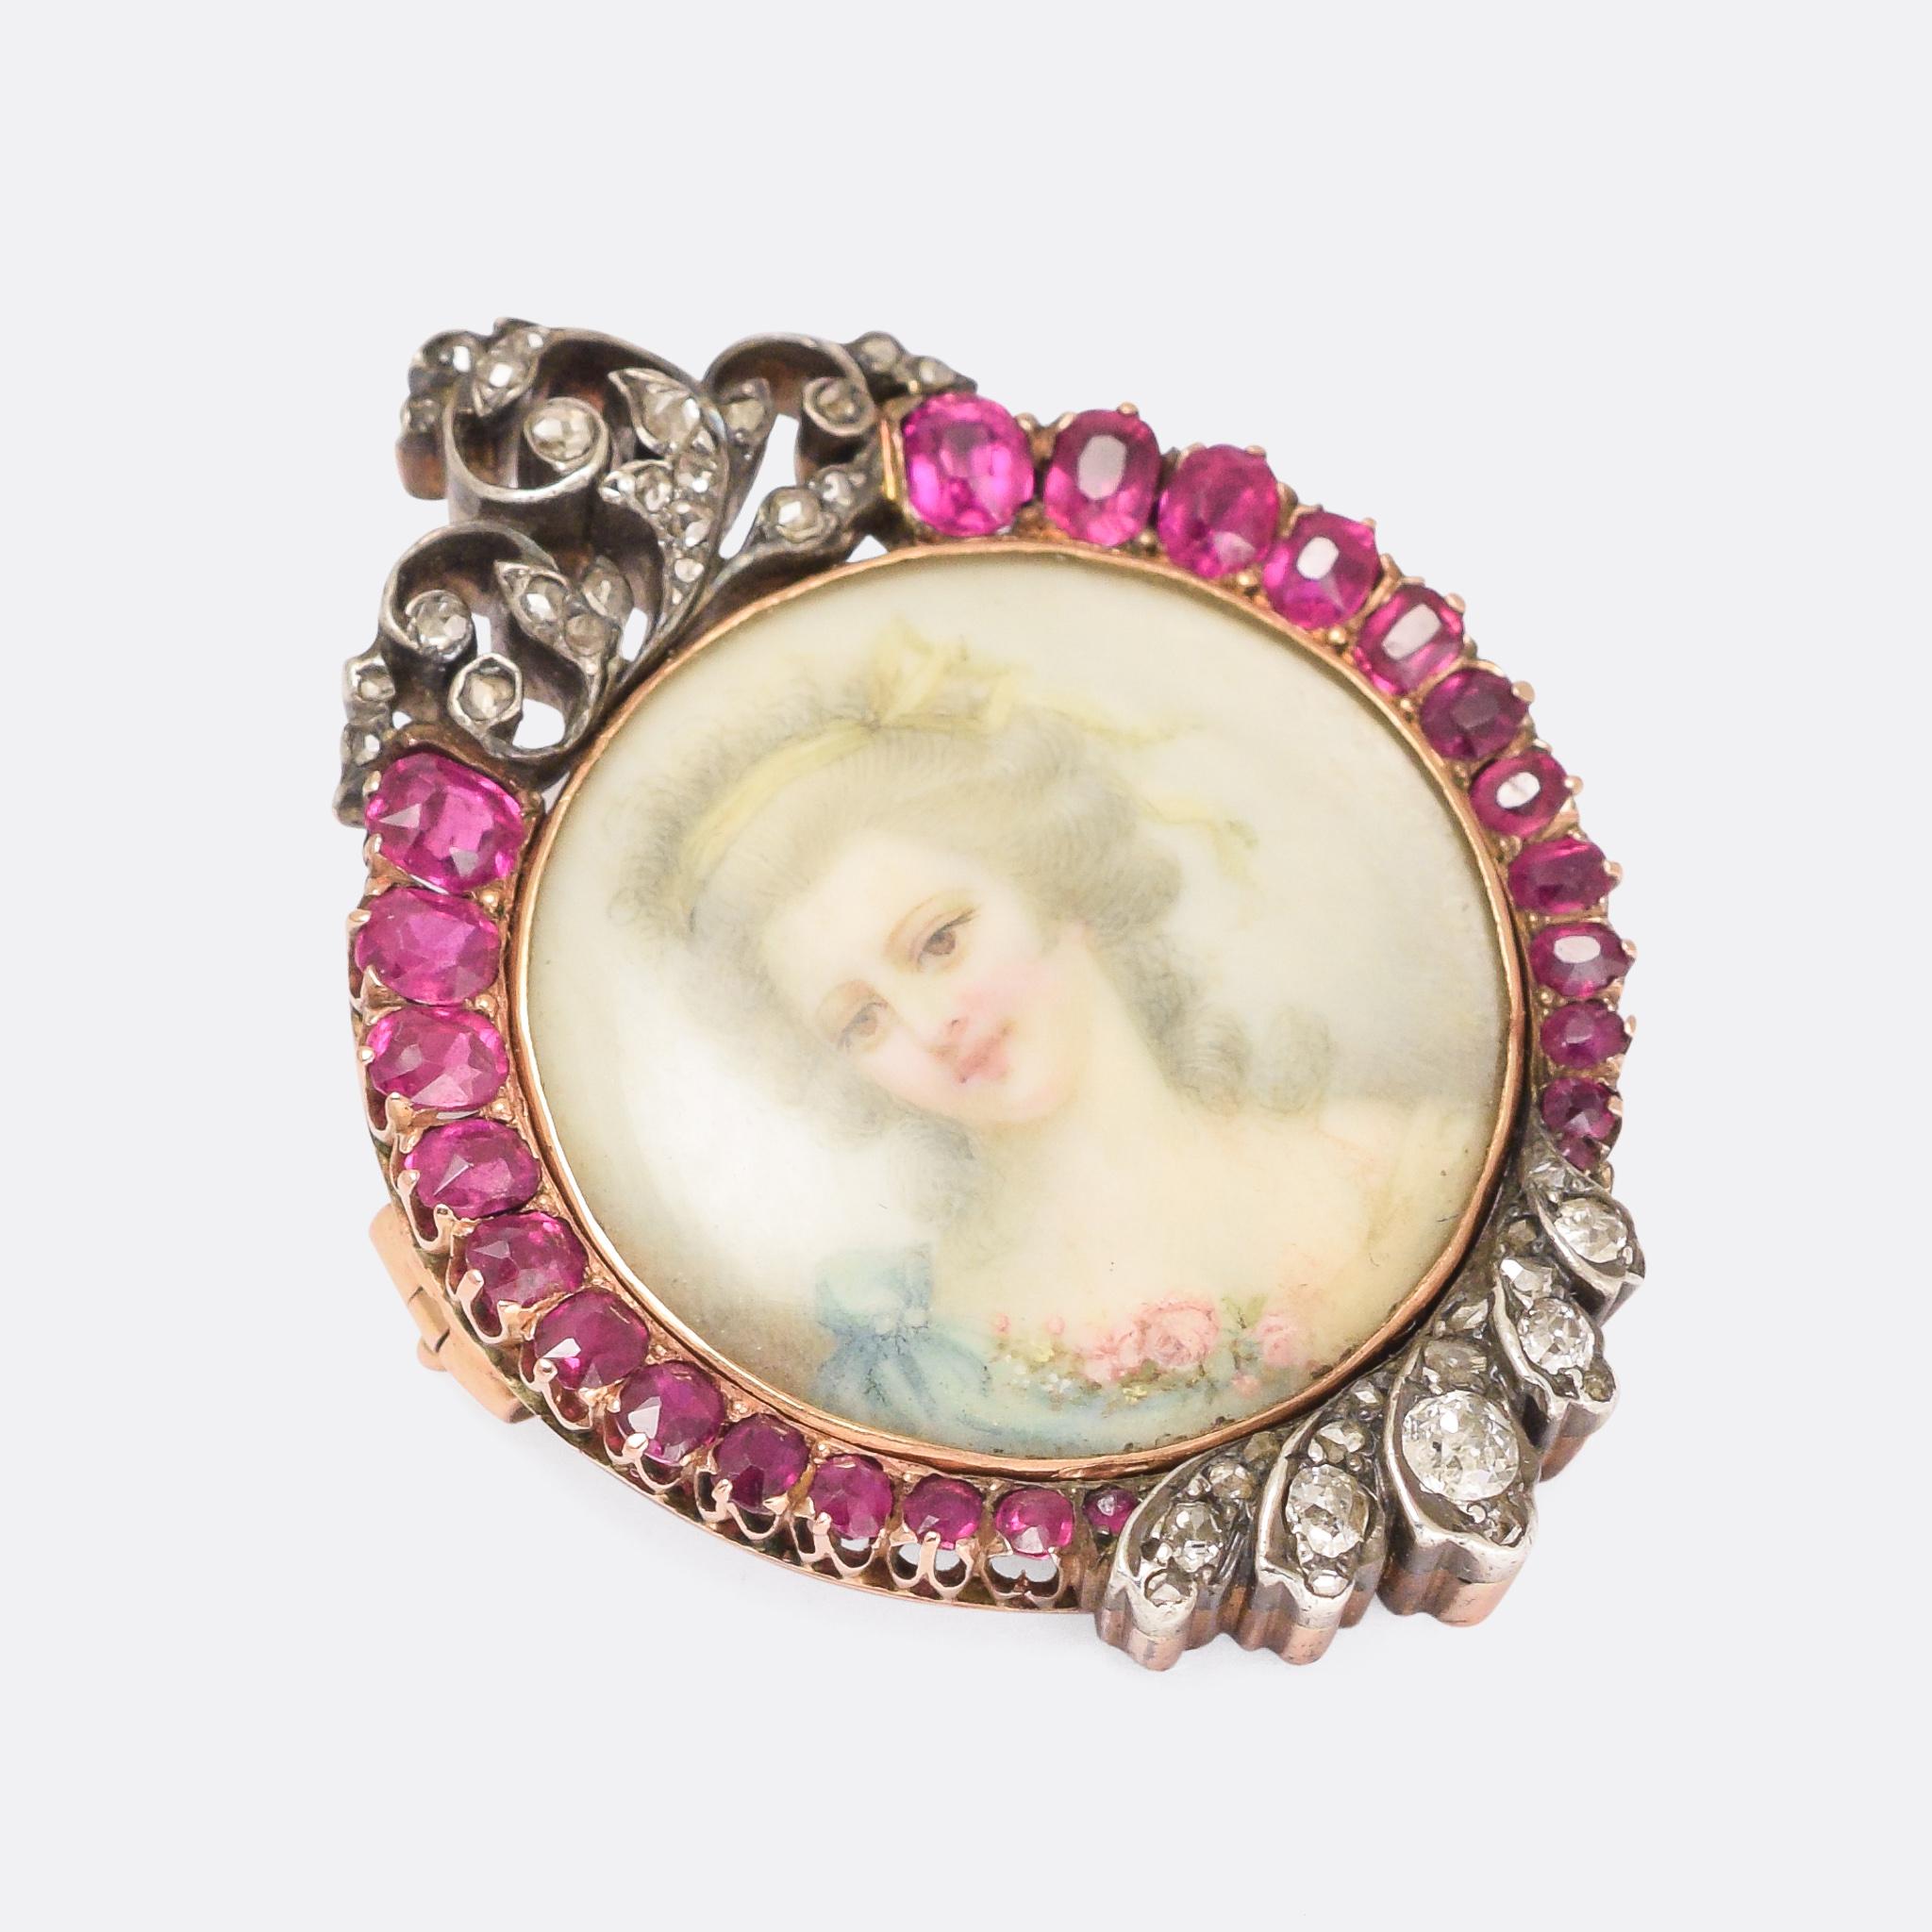 A glorious Victorian miniature portrait brooch dating from the latter half of the 19th Century, circa 1880. The lady depicted wears a yellow ribbon in her hair, and a light blue dress adorned with pink roses. The frame is quite spectacular, set with